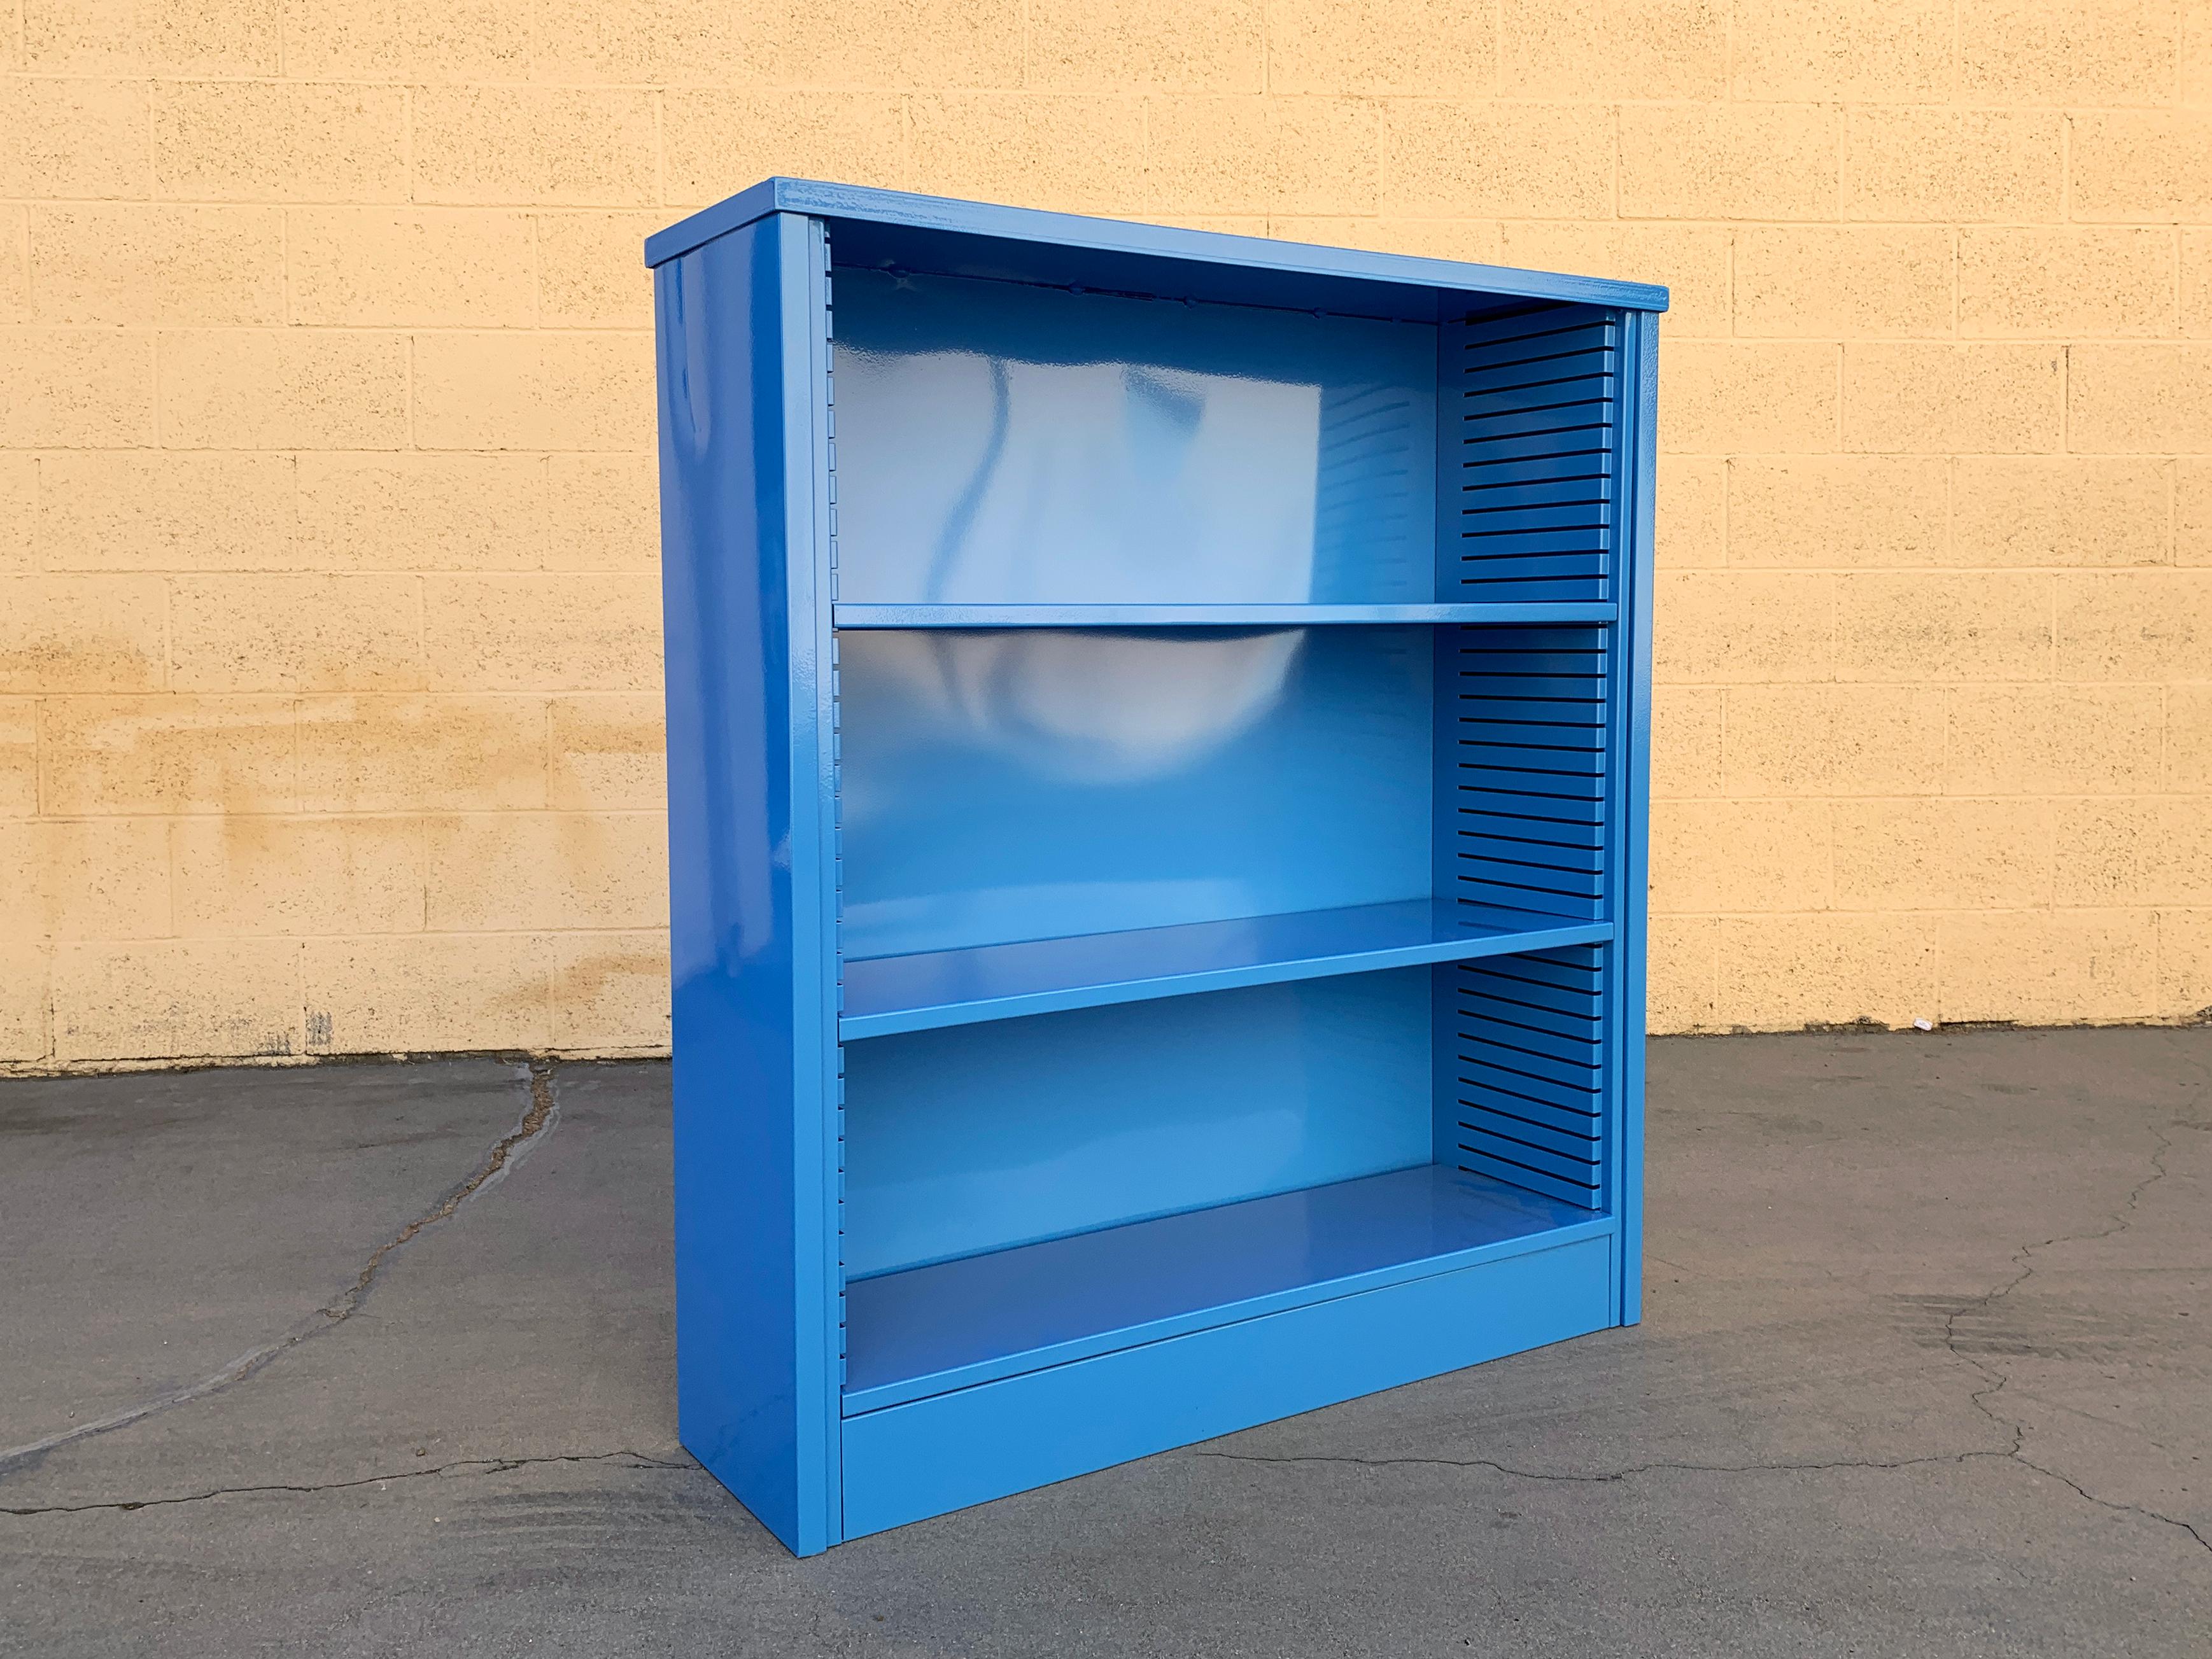 Neat 1960s tanker style steel bookcase freshly powder-coated in high gloss blue (BL05). This adjustable 3-shelf unit is an excellent storage option– its sleek and compact, yet holds many books. It's perfect for storage and display. Please not this